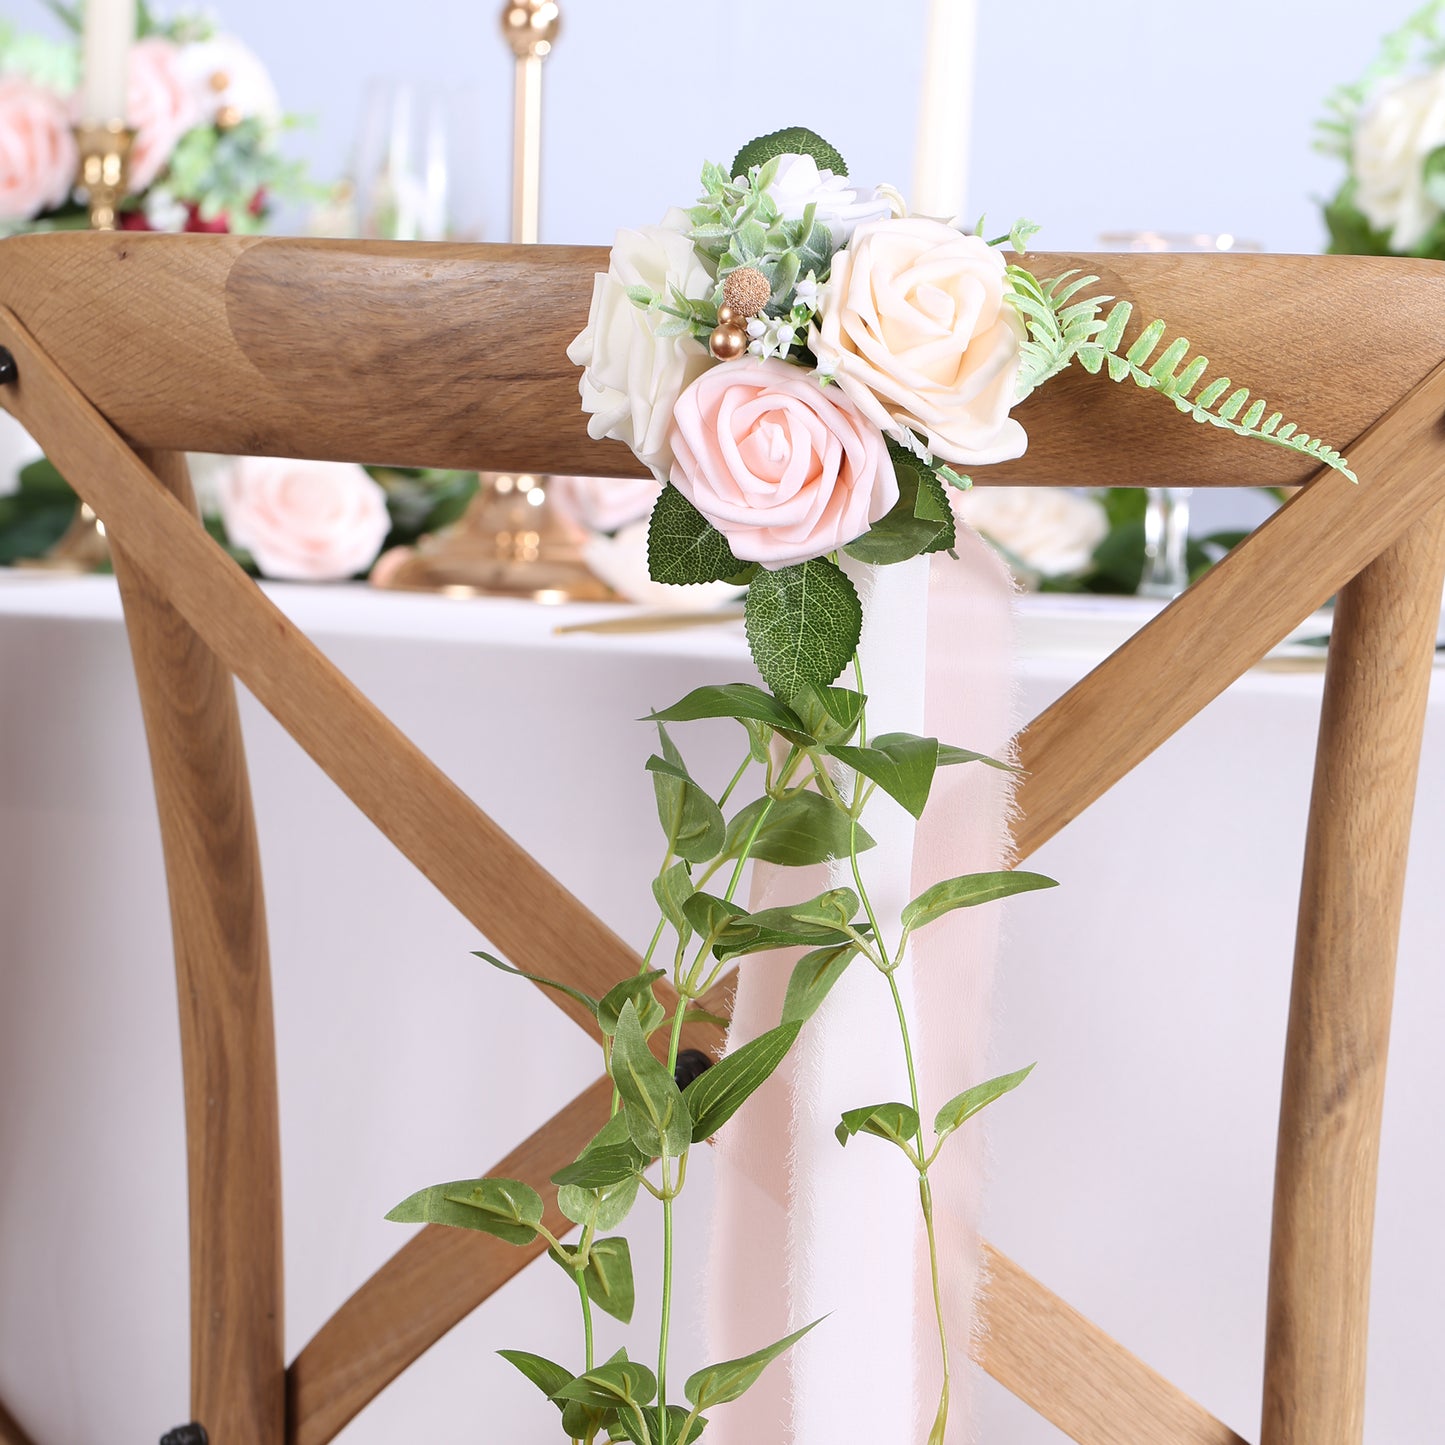 Wedding Aisle Decorations Pink Pew Flowers Set of 10 for Wedding Ceremony Party Chair Decor with Artificial Flowers Eucalyptus and Ribbons